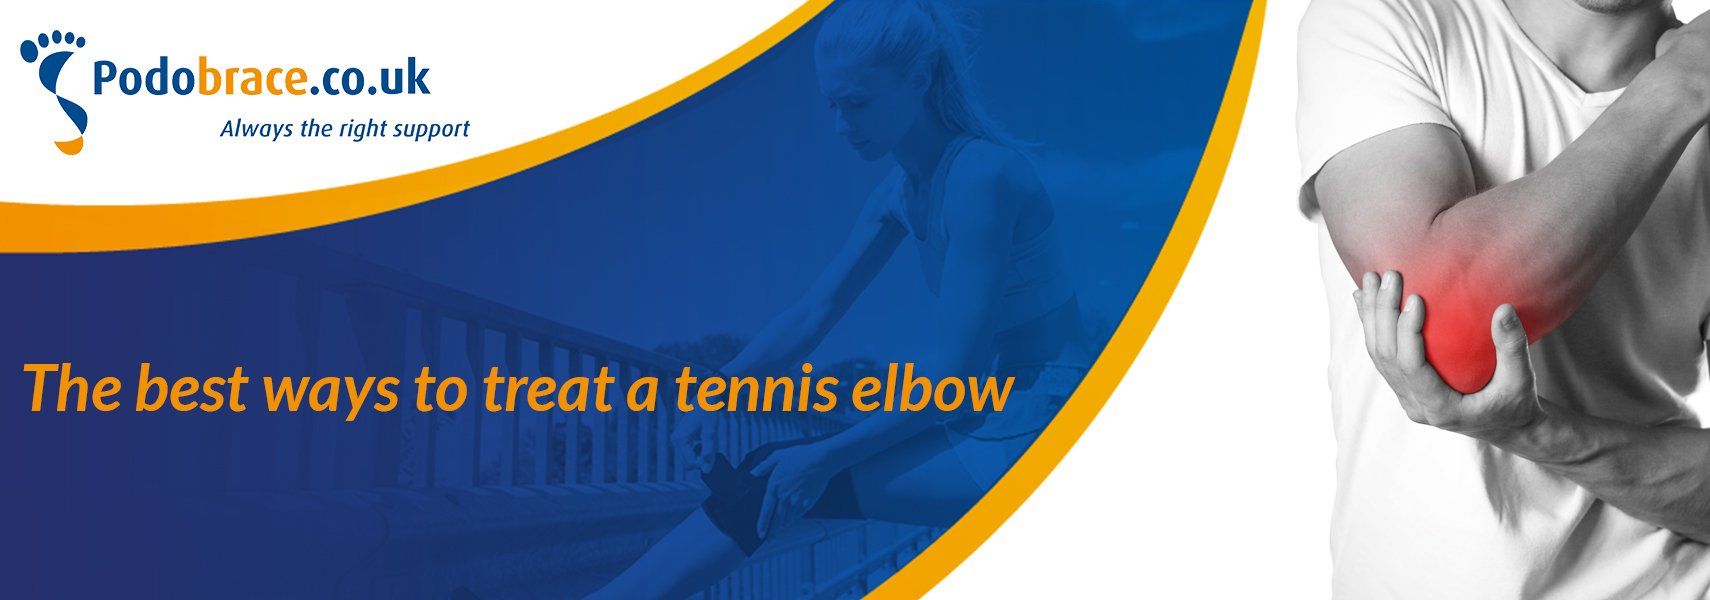 The best ways to treat a tennis elbow